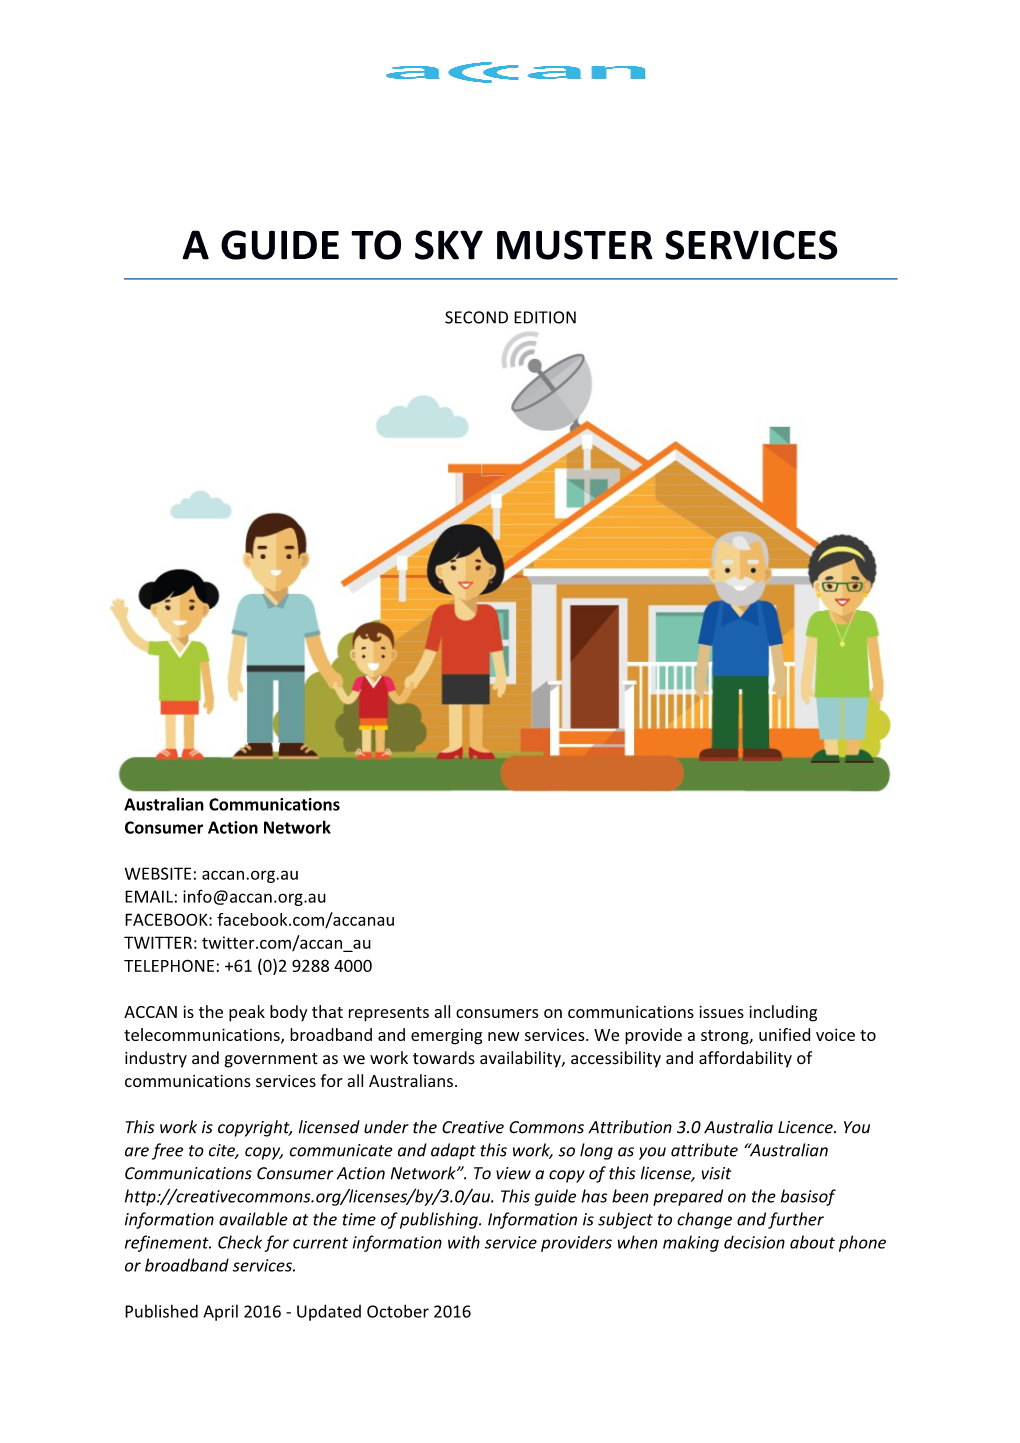 A Guide to Sky Muster Services